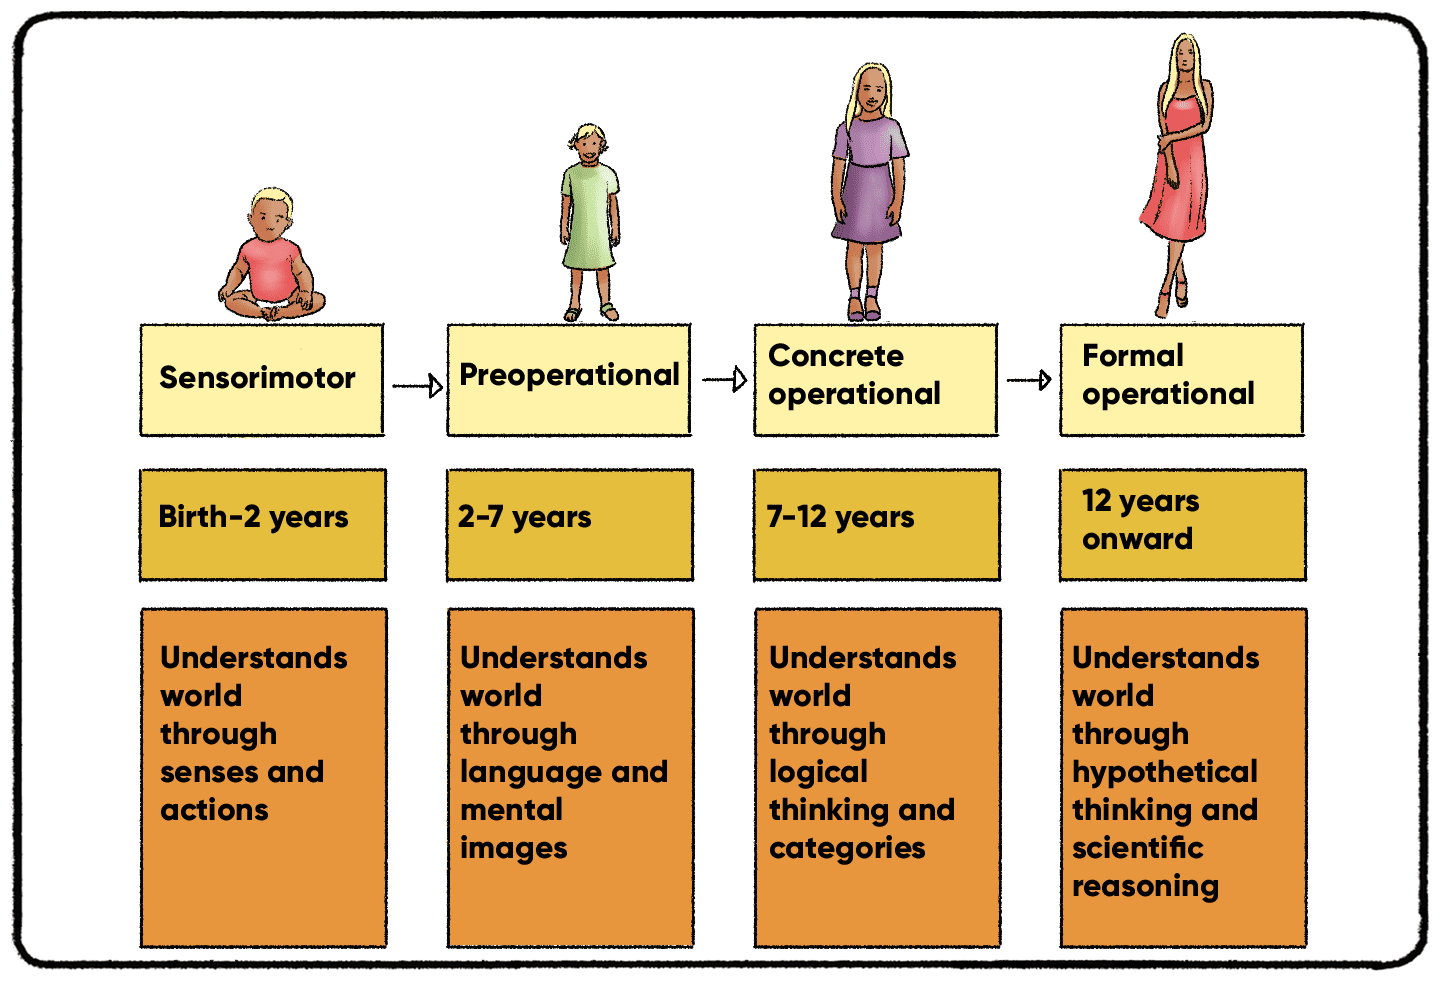 piaget's stages of cognitive development